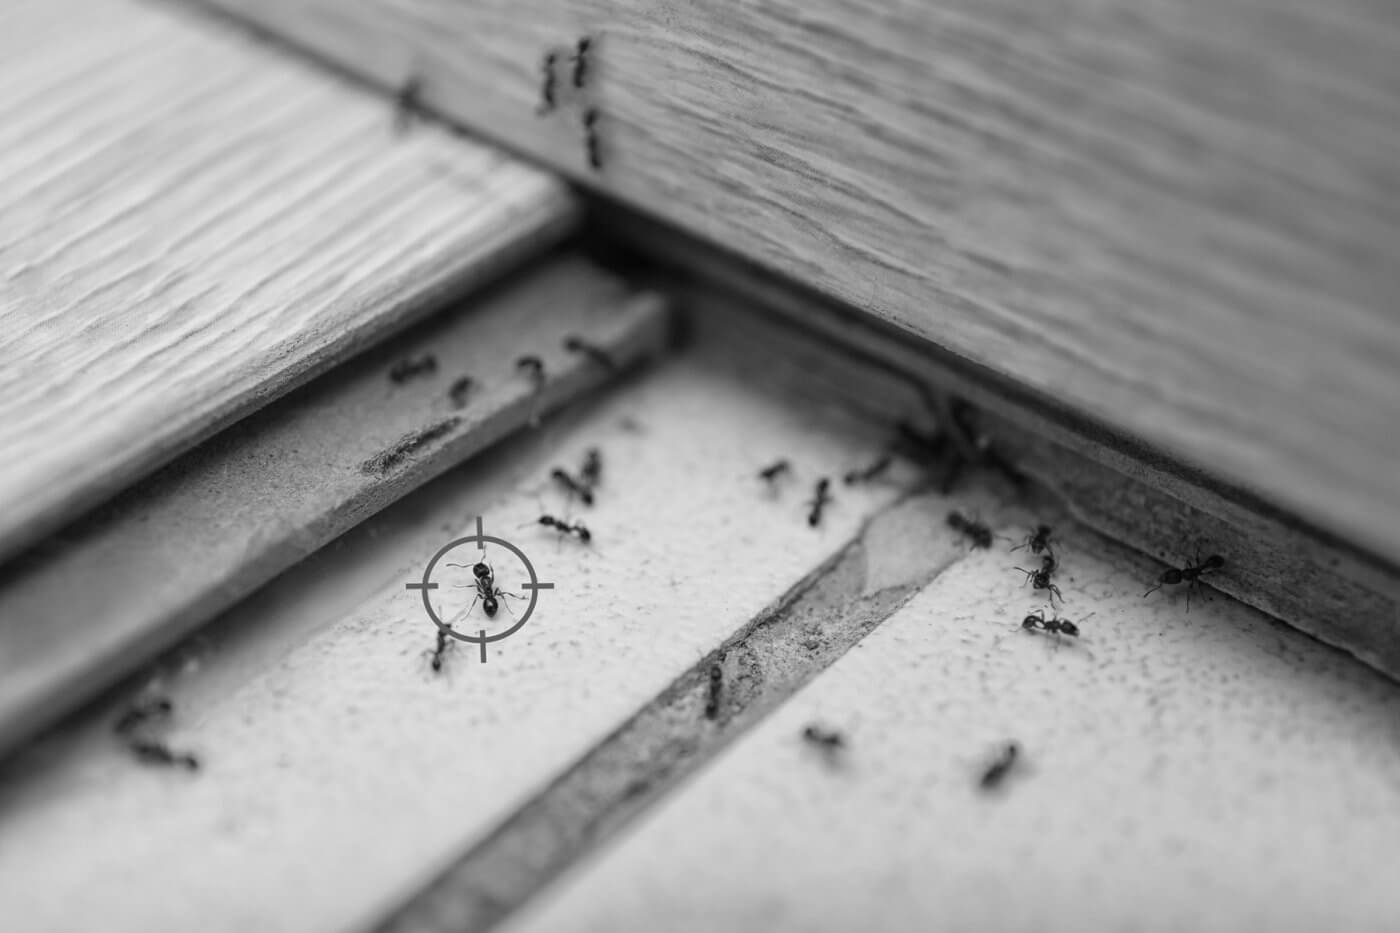 How to Get Rid of Ants in Your Home